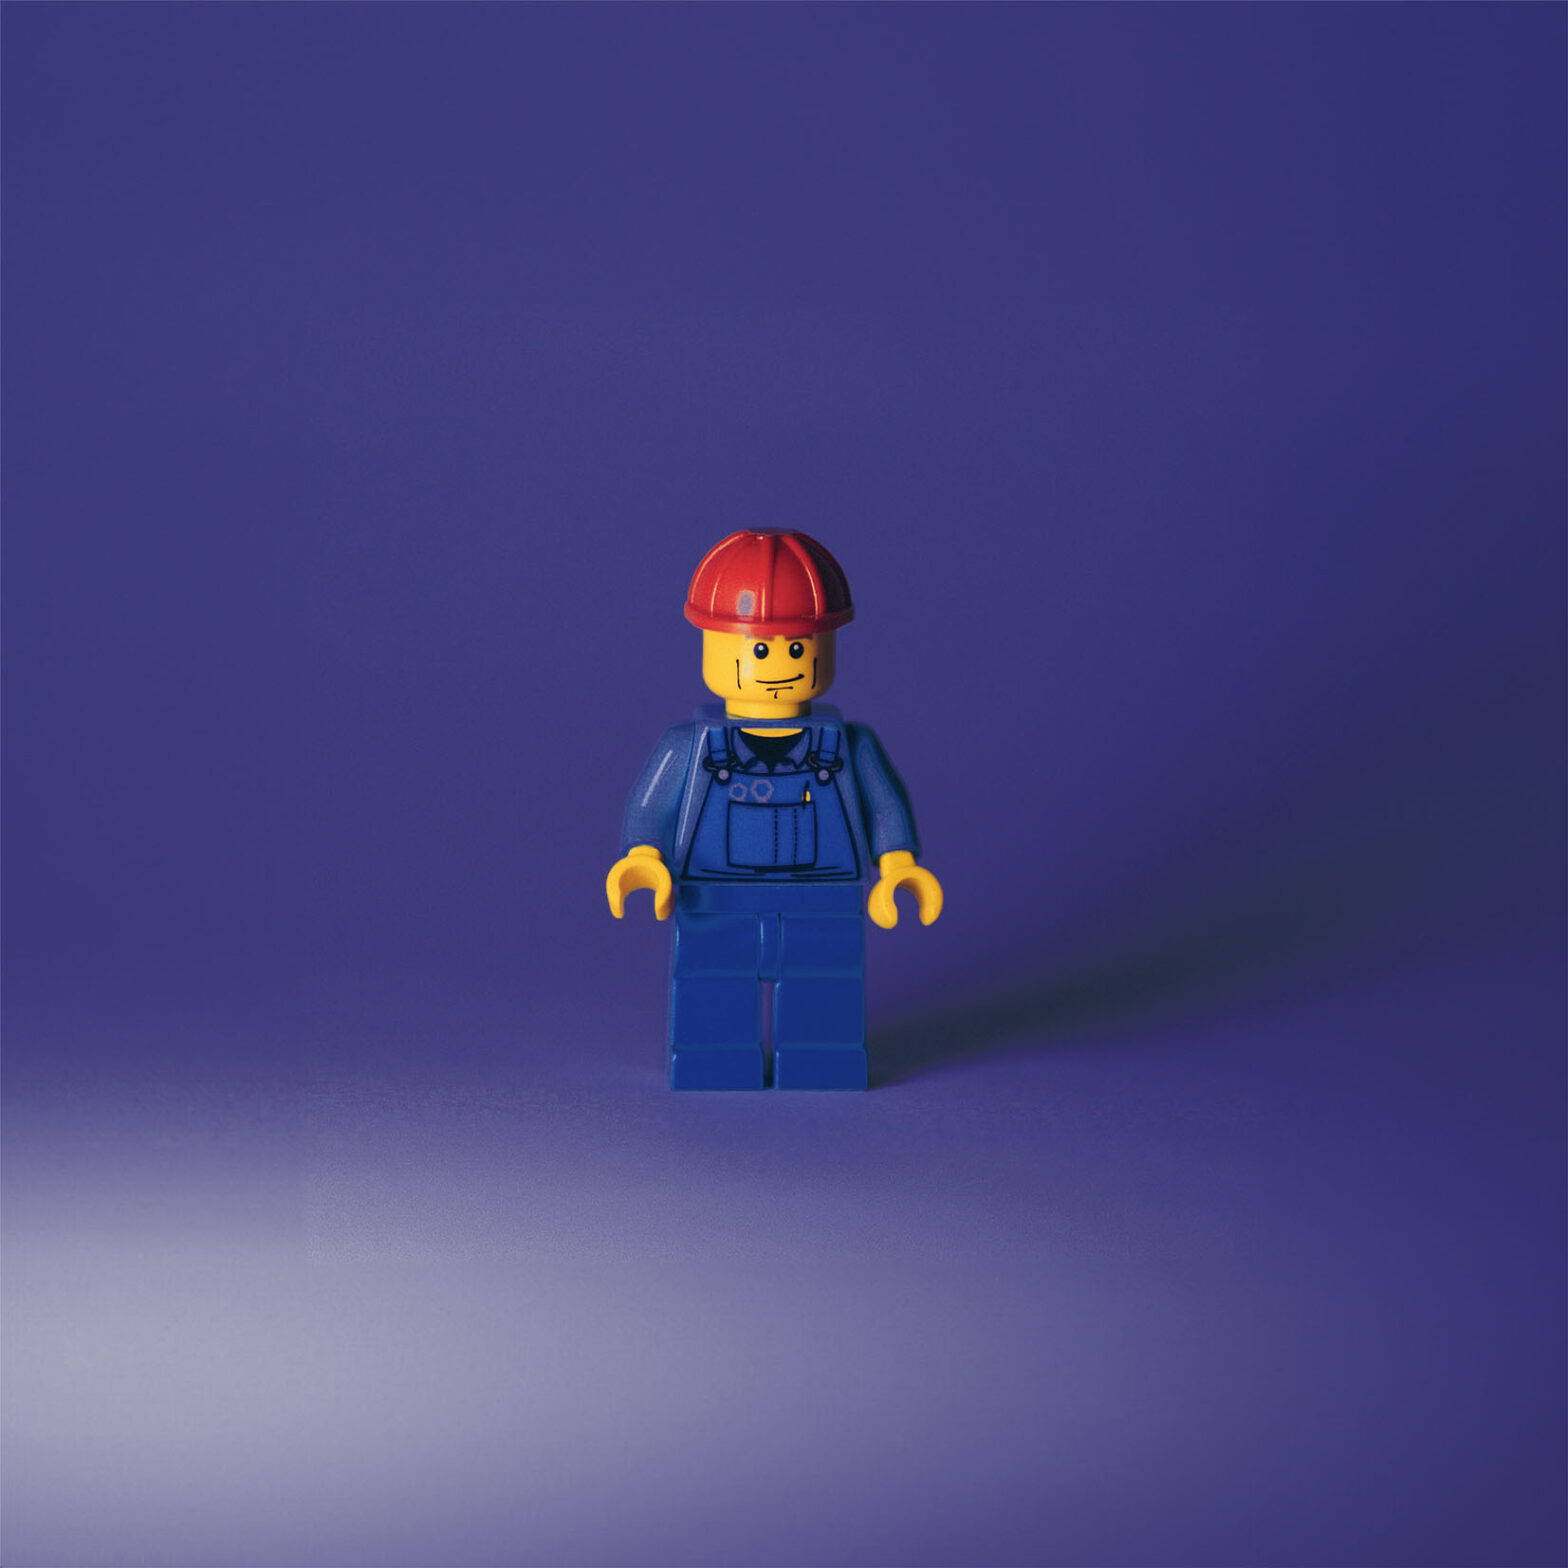 Lego man dressed as a contractor, wearing a hard hat and coveralls.